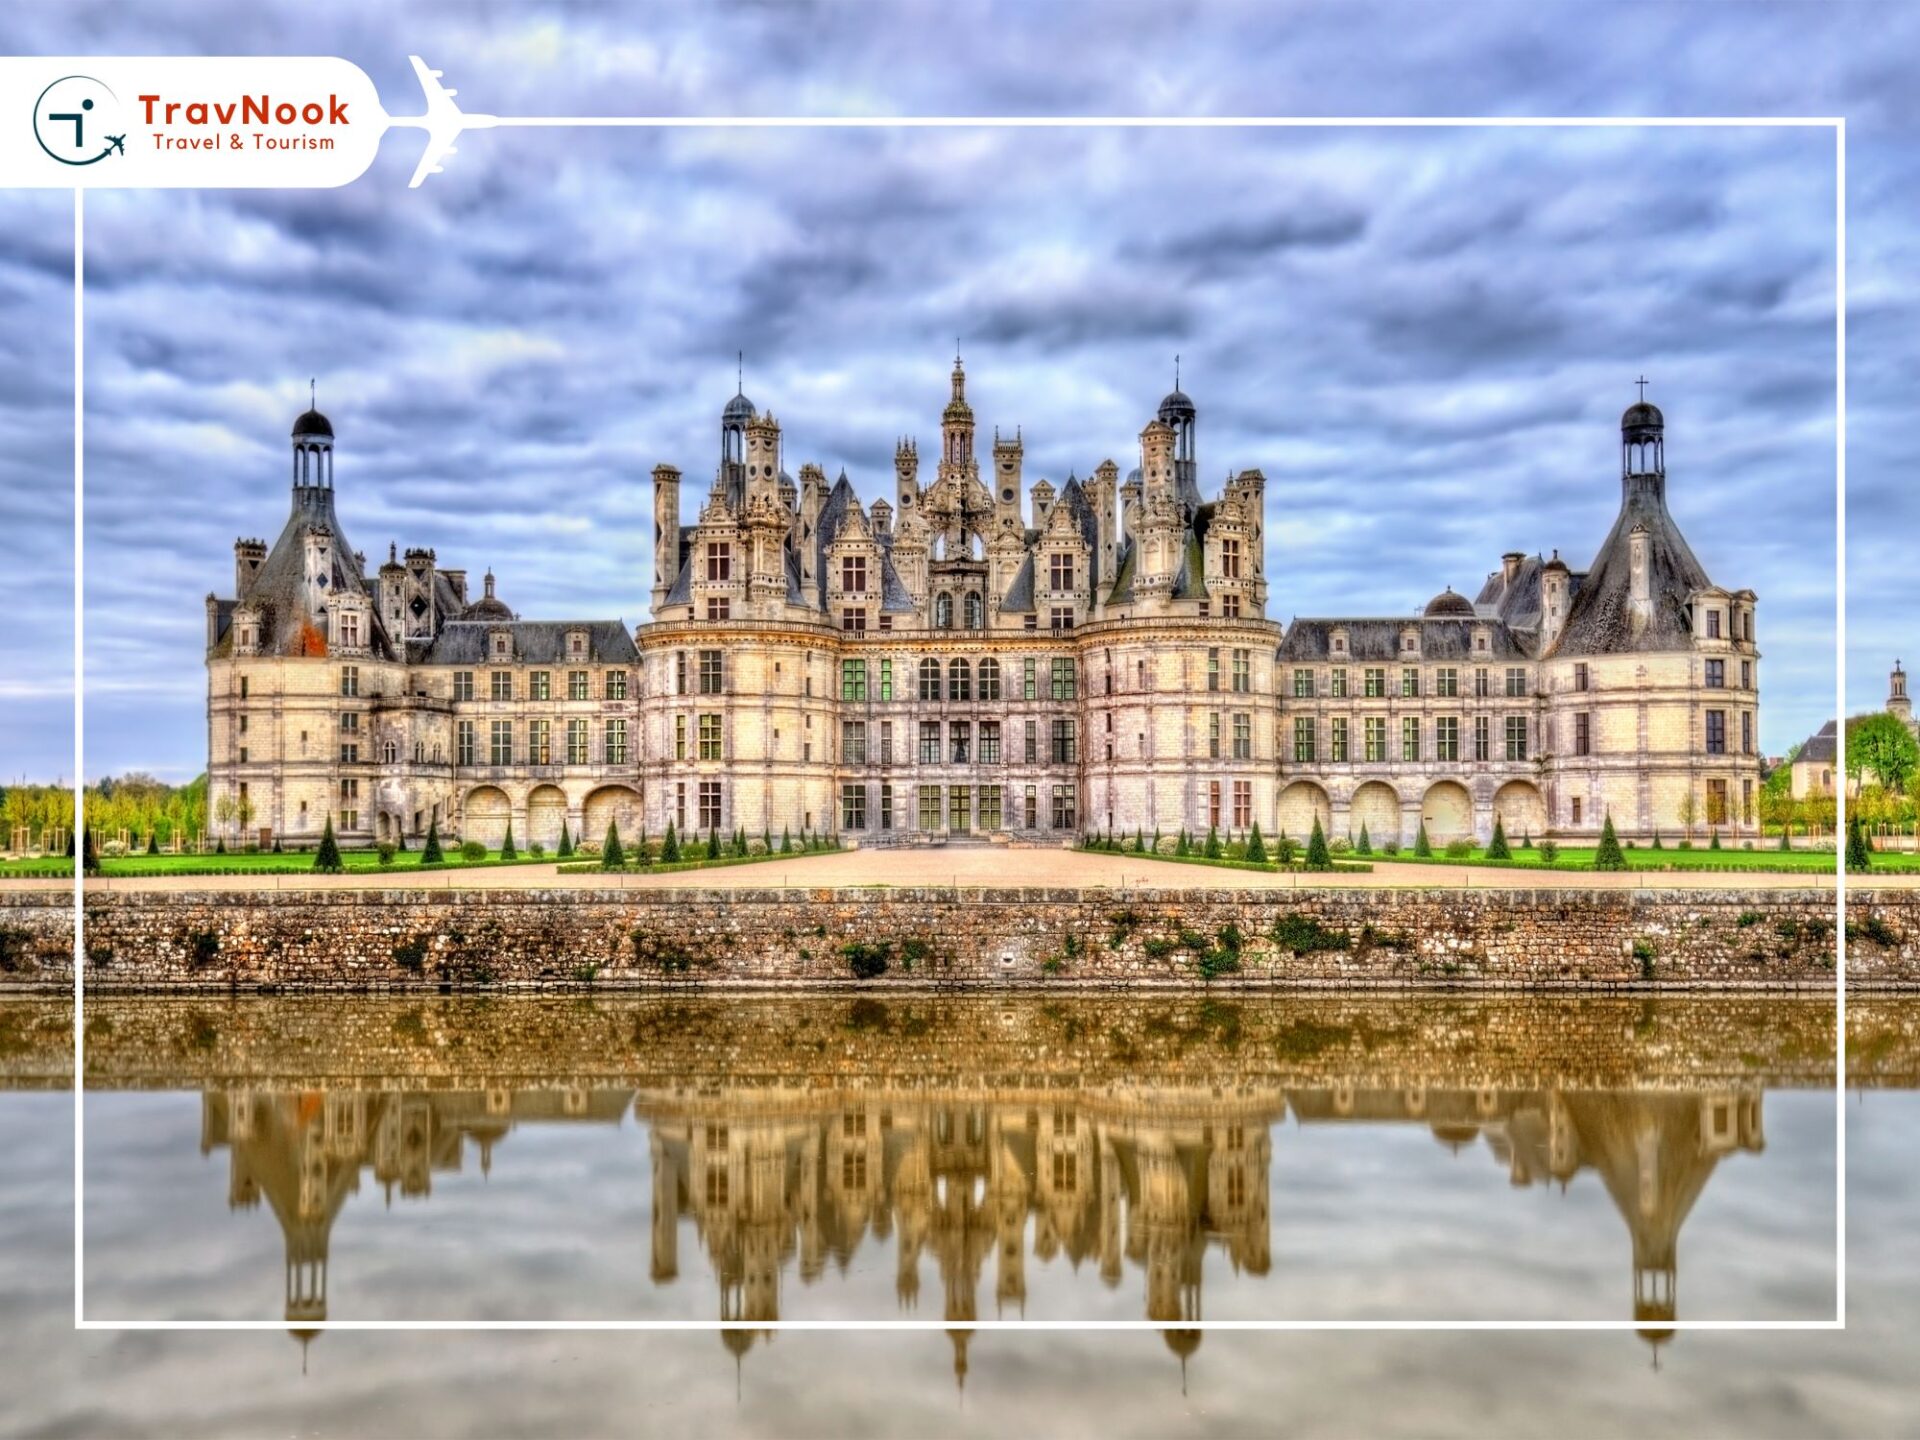 Famous Landmarks in France to Visit From UAE - Château de Chambord, Loire Valley